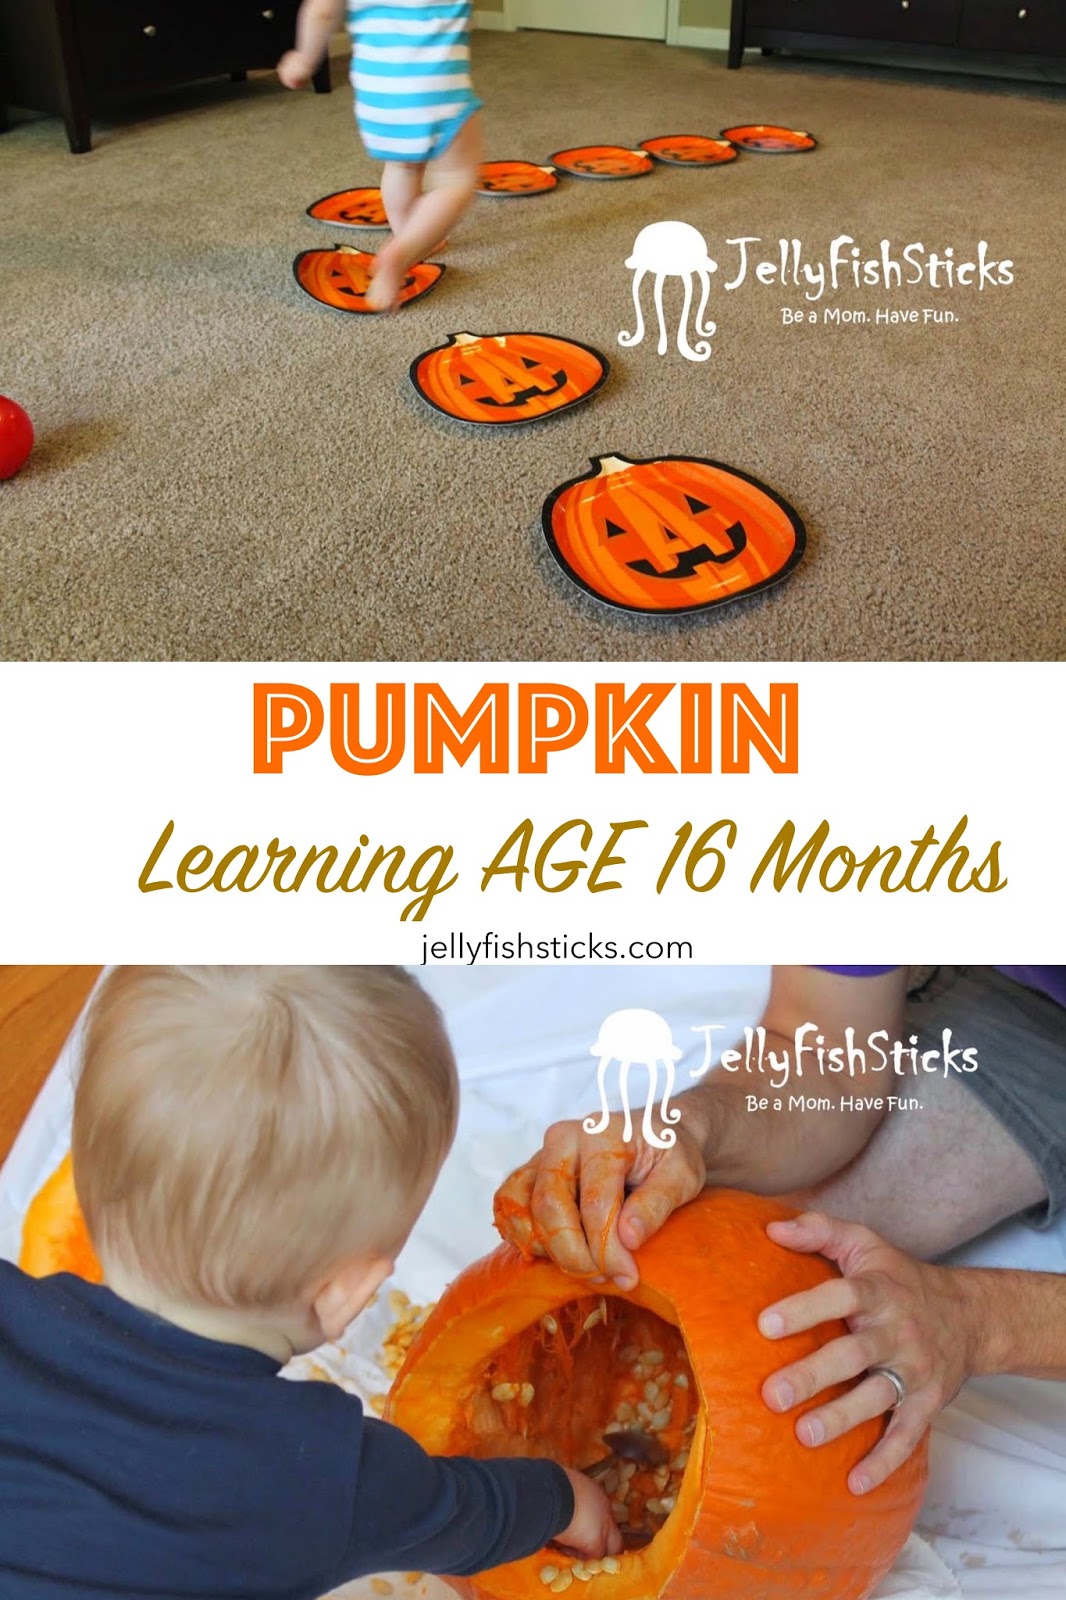 Pumpkin Learning Plan for 16 Month Olds